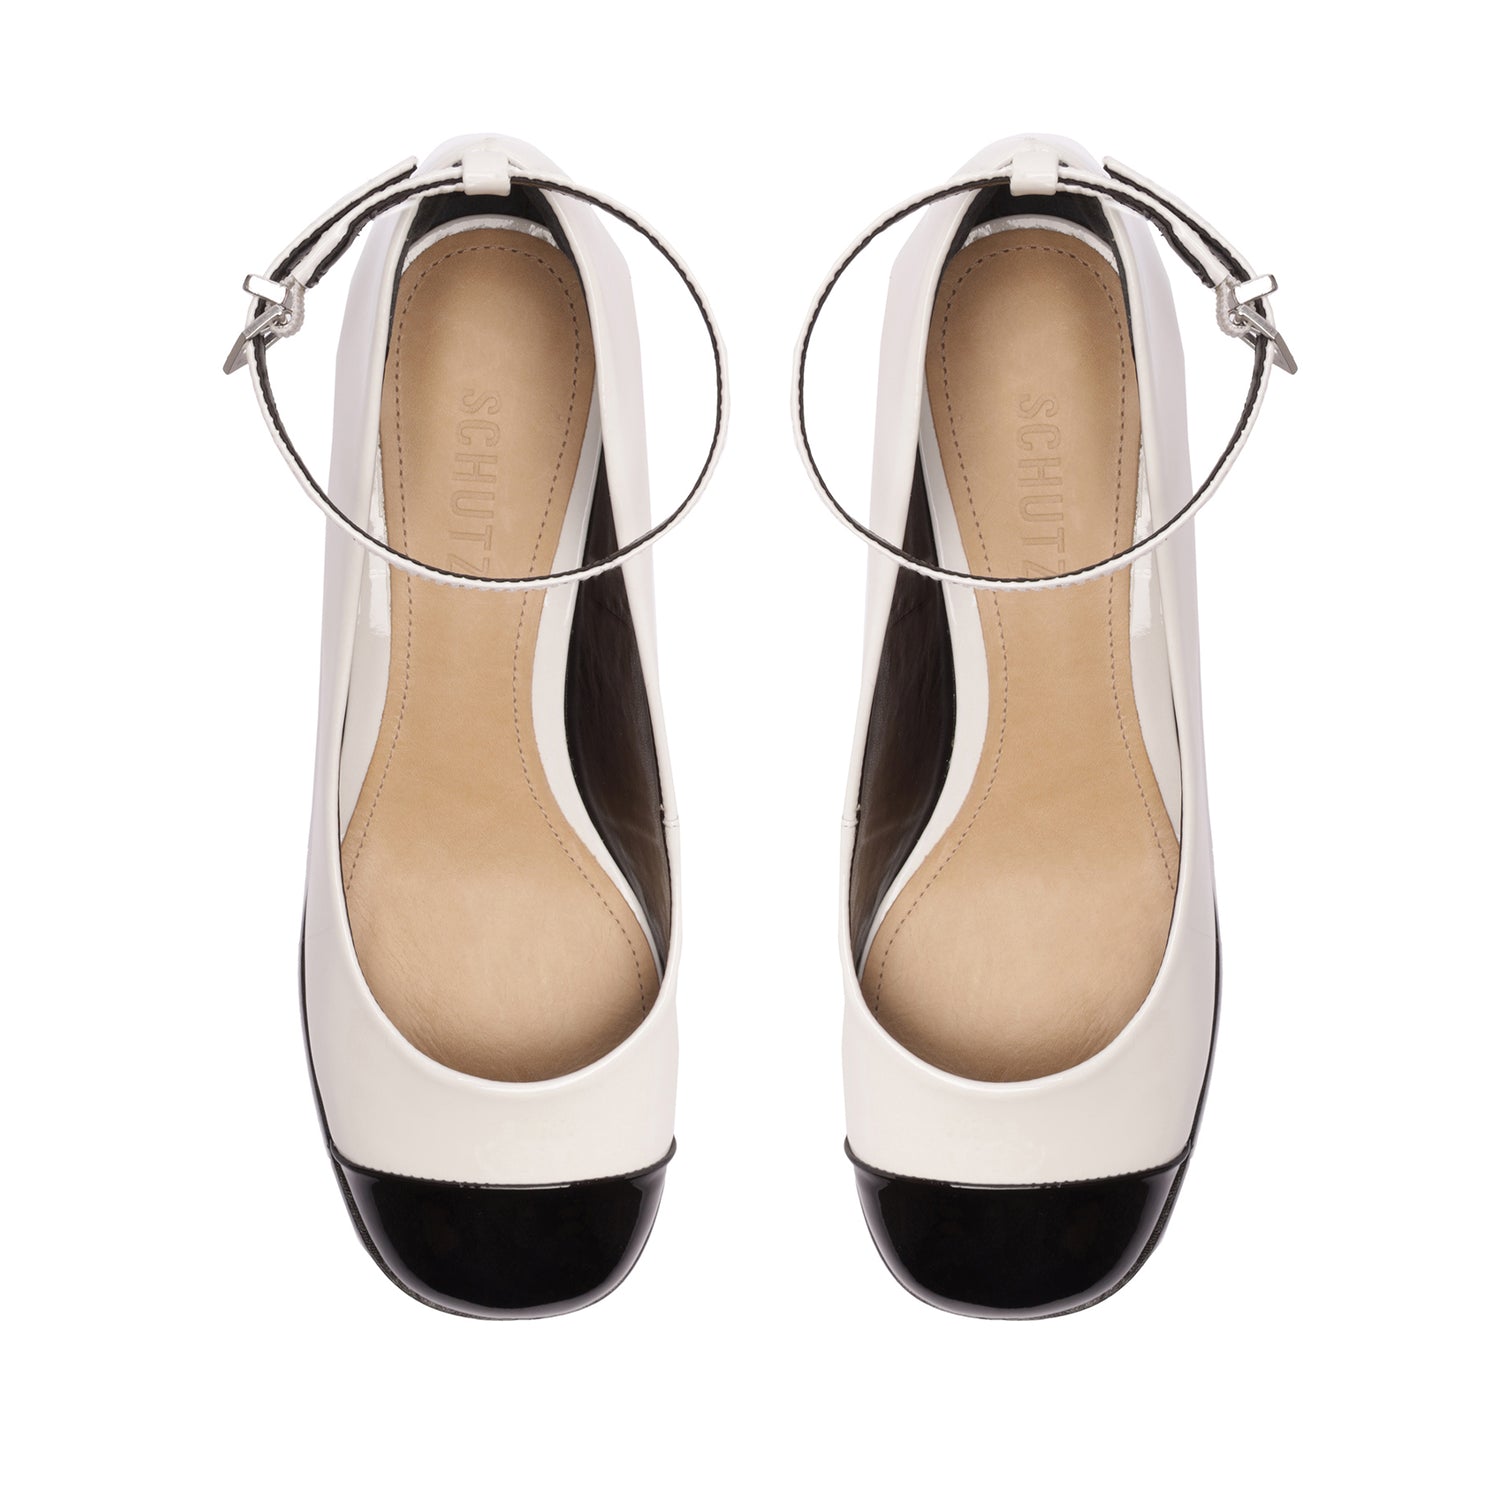 Dorothy Casual Patent Leather Pump White